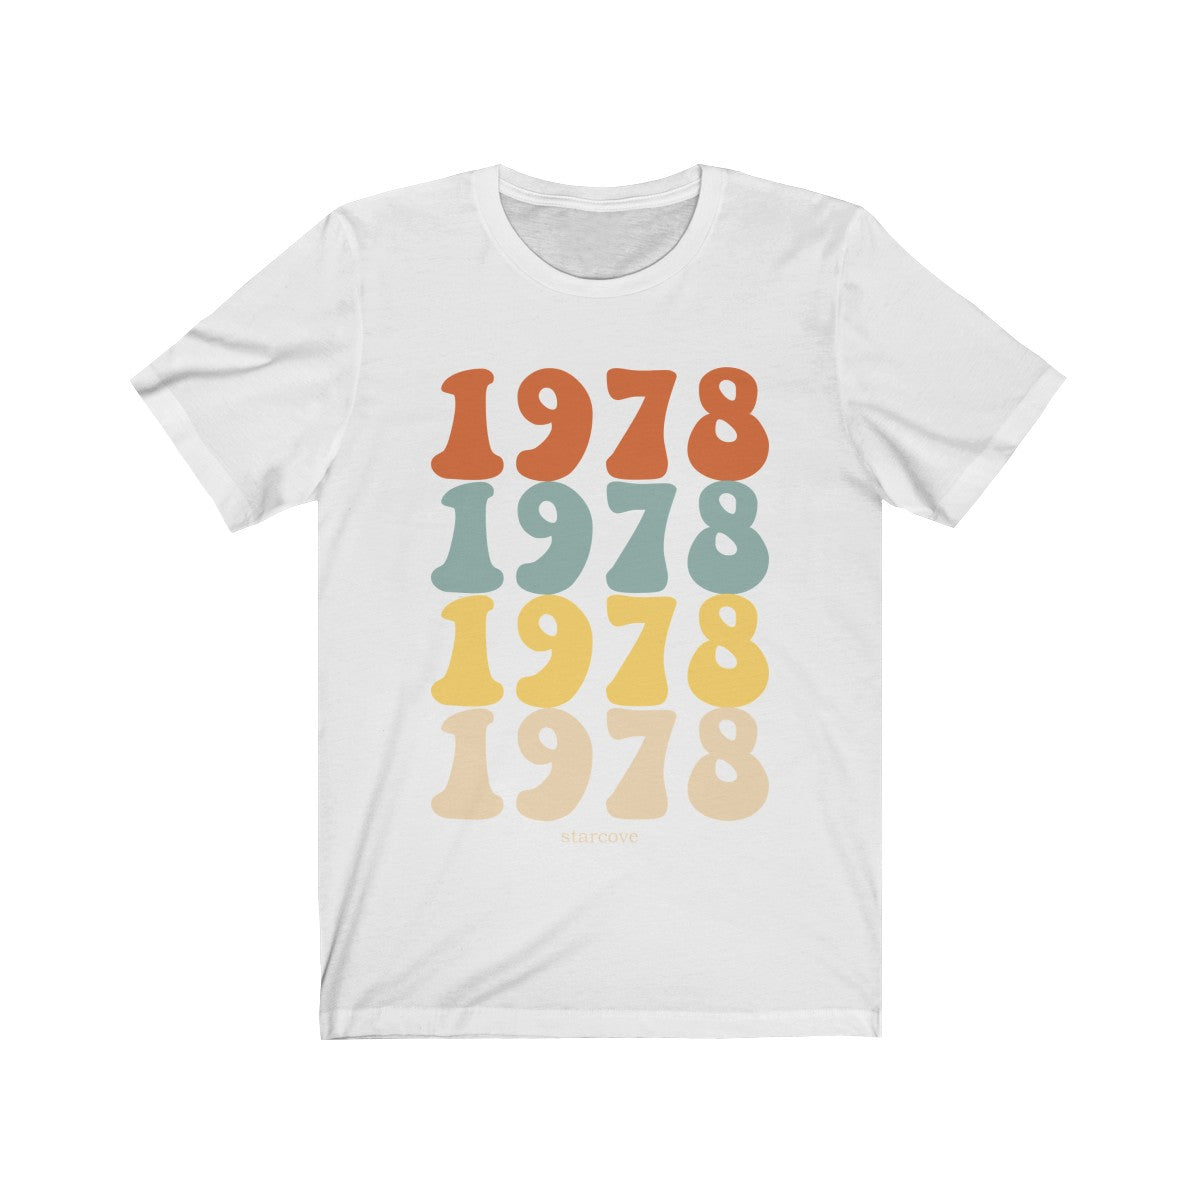 1978 shirt, 45th Birthday Party Turning 45 Years Old, 70s Retro Vintage gift Idea Women Men, Born Made in 1978 Funny present Dad Mom TShirt Starcove Fashion